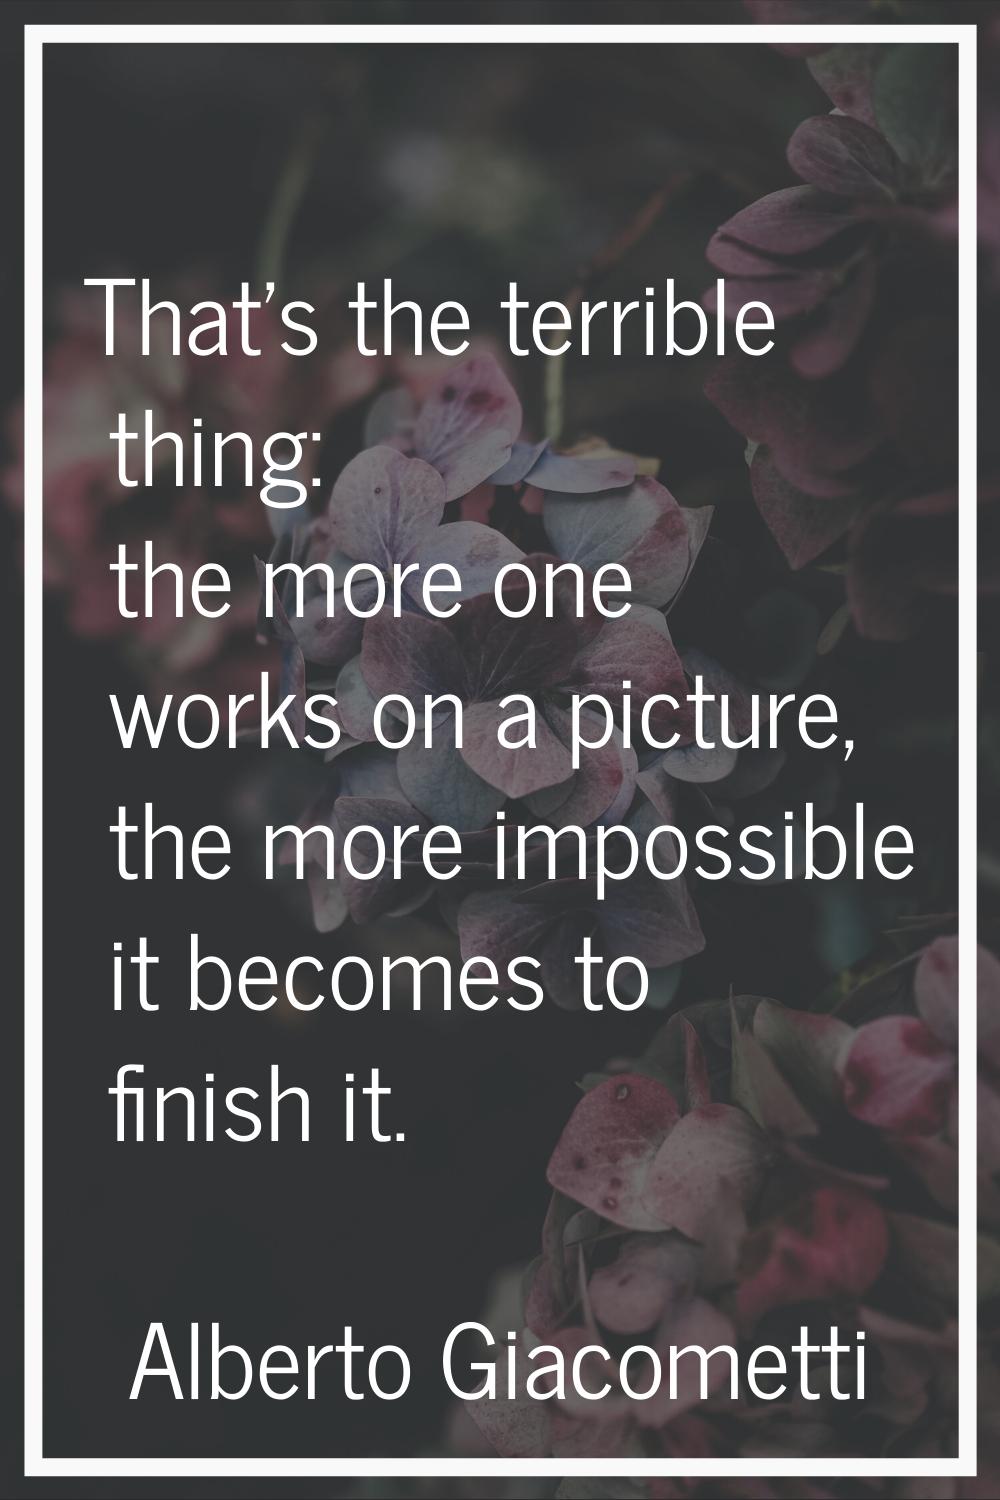 That's the terrible thing: the more one works on a picture, the more impossible it becomes to finis